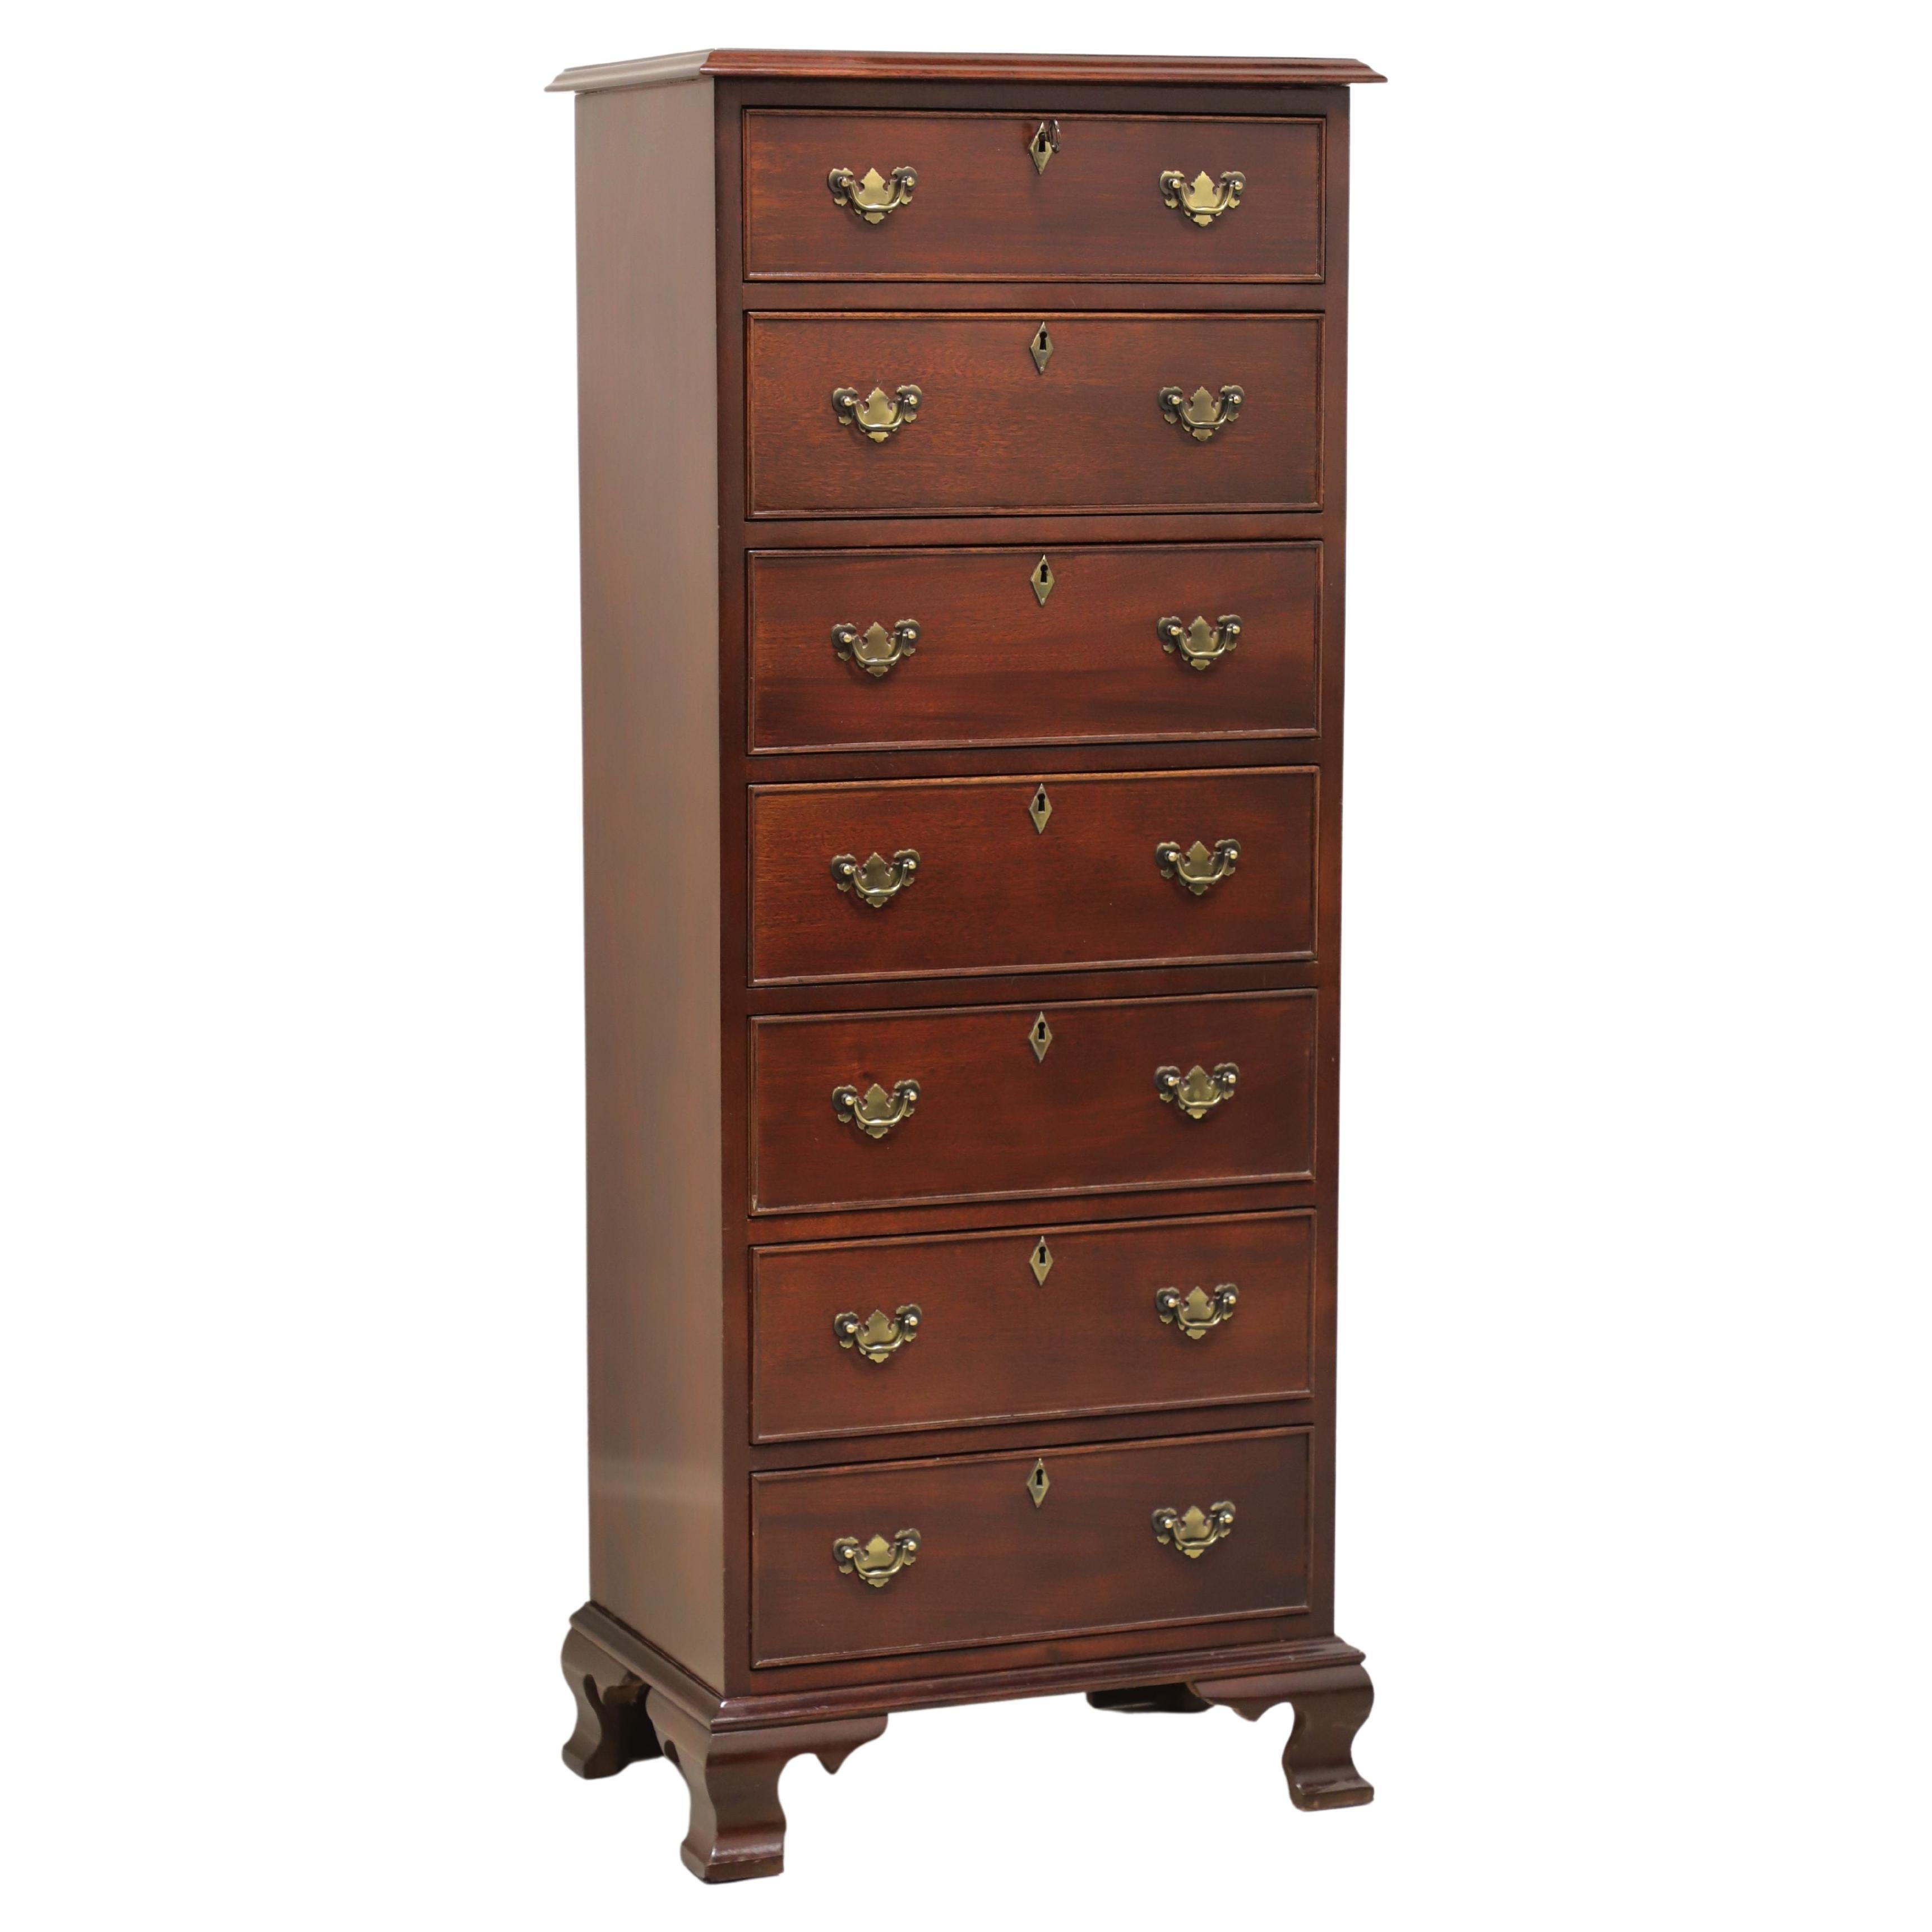 CRAFTIQUE Solid Mahogany Chippendale Semainier Lingerie Chest with Ogee Feet